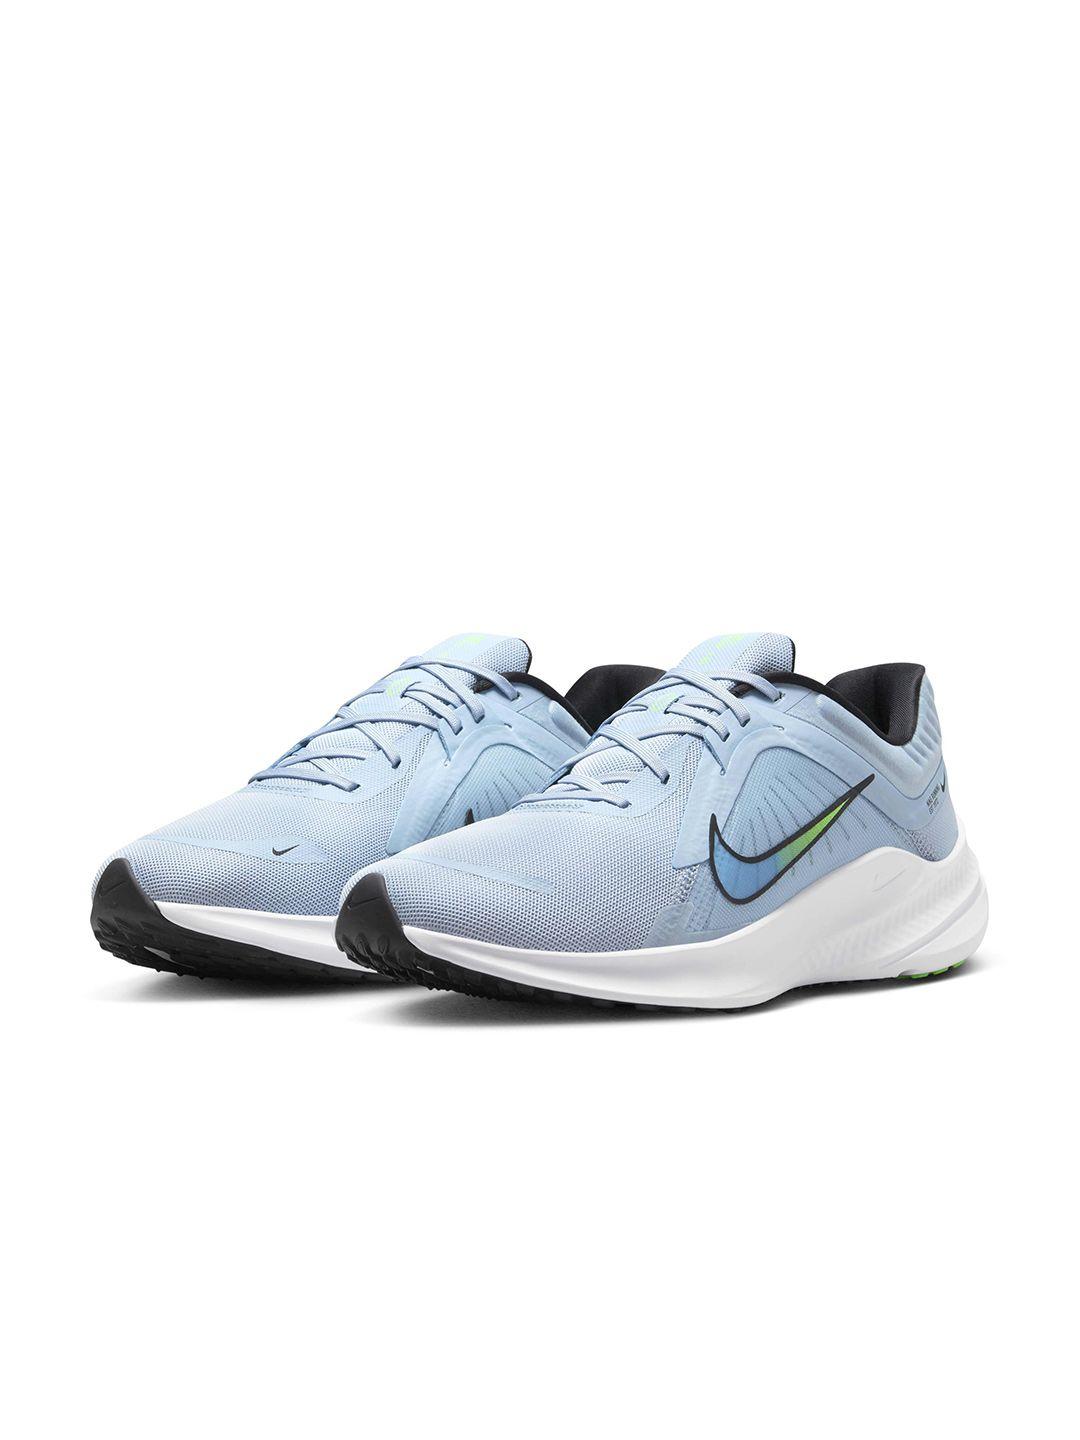 Nike Men Quest 5 Road Running Shoes